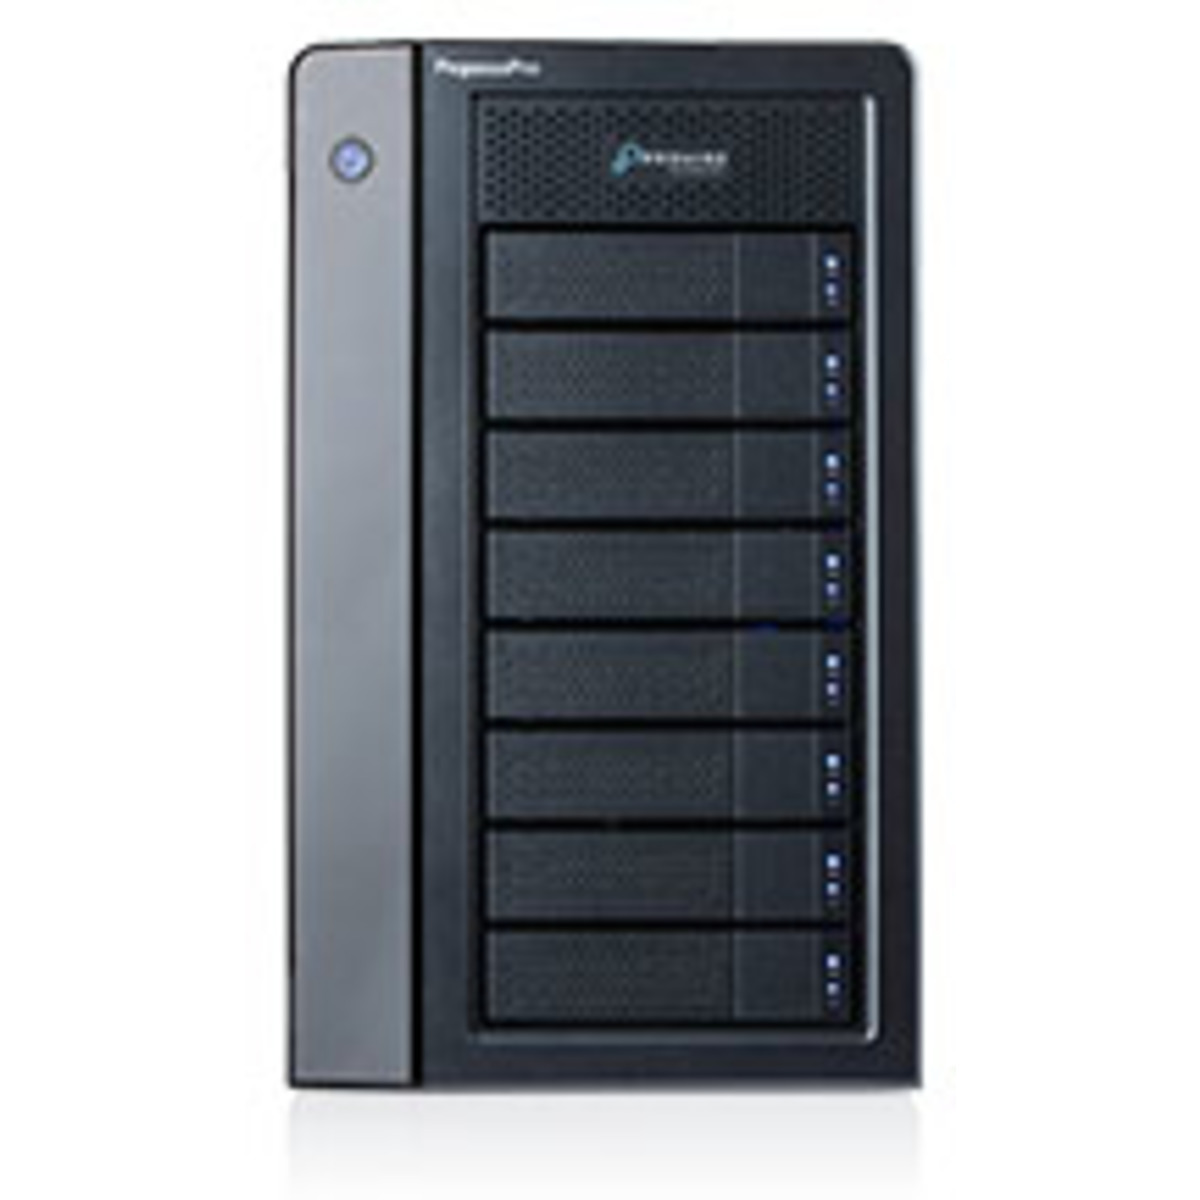 Promise Technology PegasusPro R8 14tb 8-Bay Desktop Multimedia / Power User / Business DAS-NAS - Combo Direct + Network Storage Device 7x2tb Western Digital Gold WD2005FBYZ 3.5 7200rpm SATA 6Gb/s HDD ENTERPRISE Class Drives Installed - Burn-In Tested PegasusPro R8